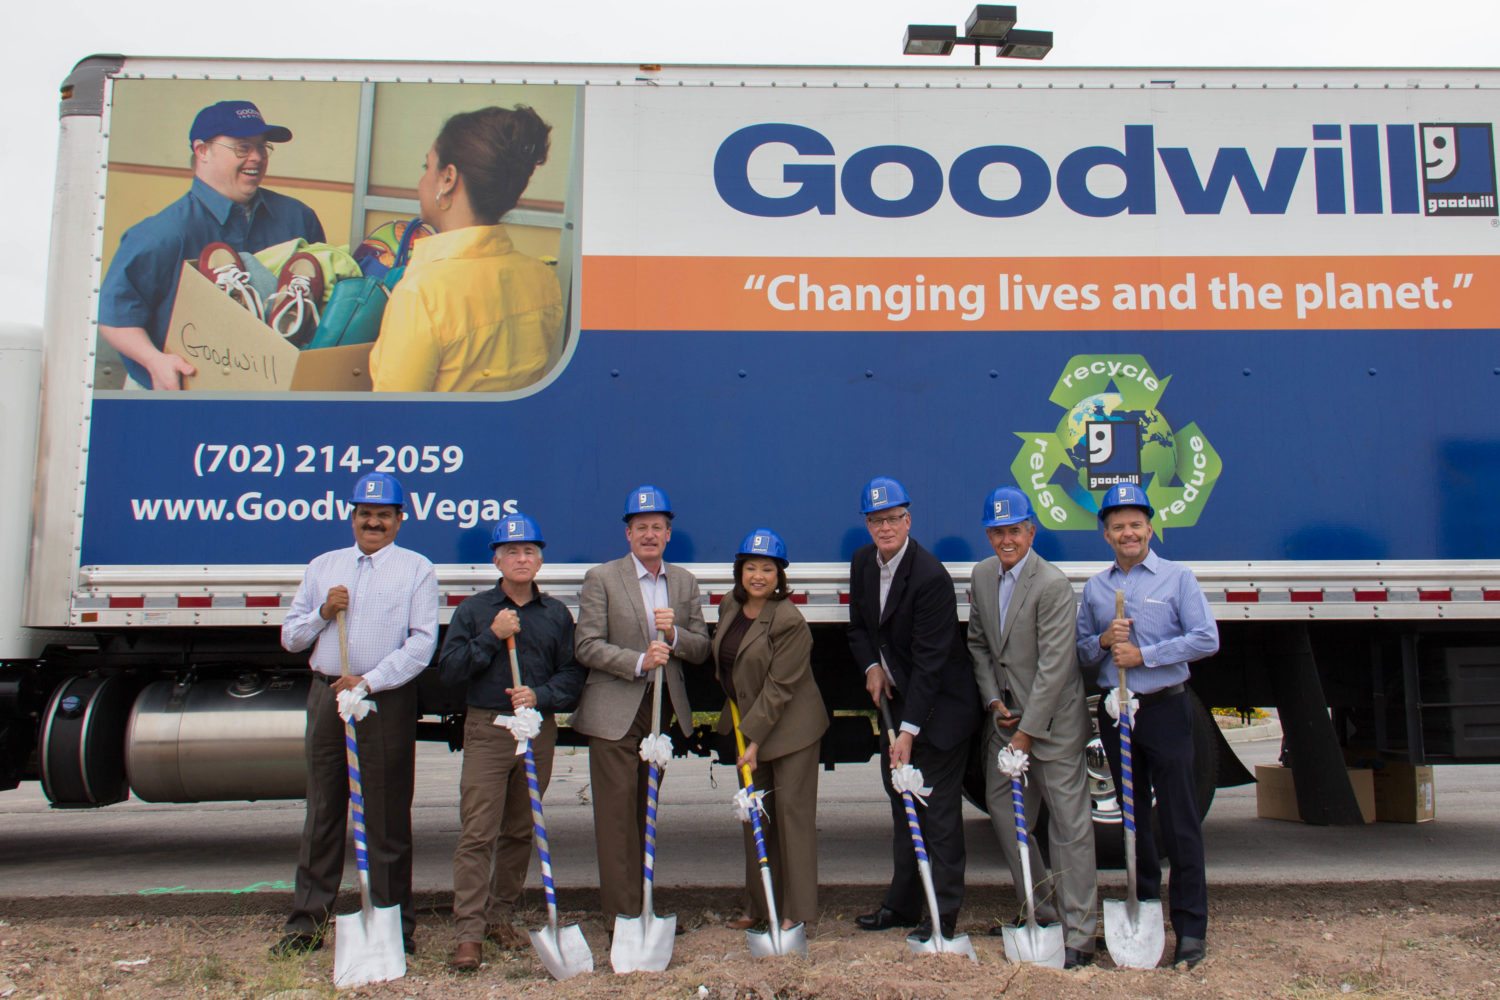 Goodwill of Southern Nevada plans to open its second Henderson Goodwill Retail Store and Drive Thru Donation Center fall of 2016.